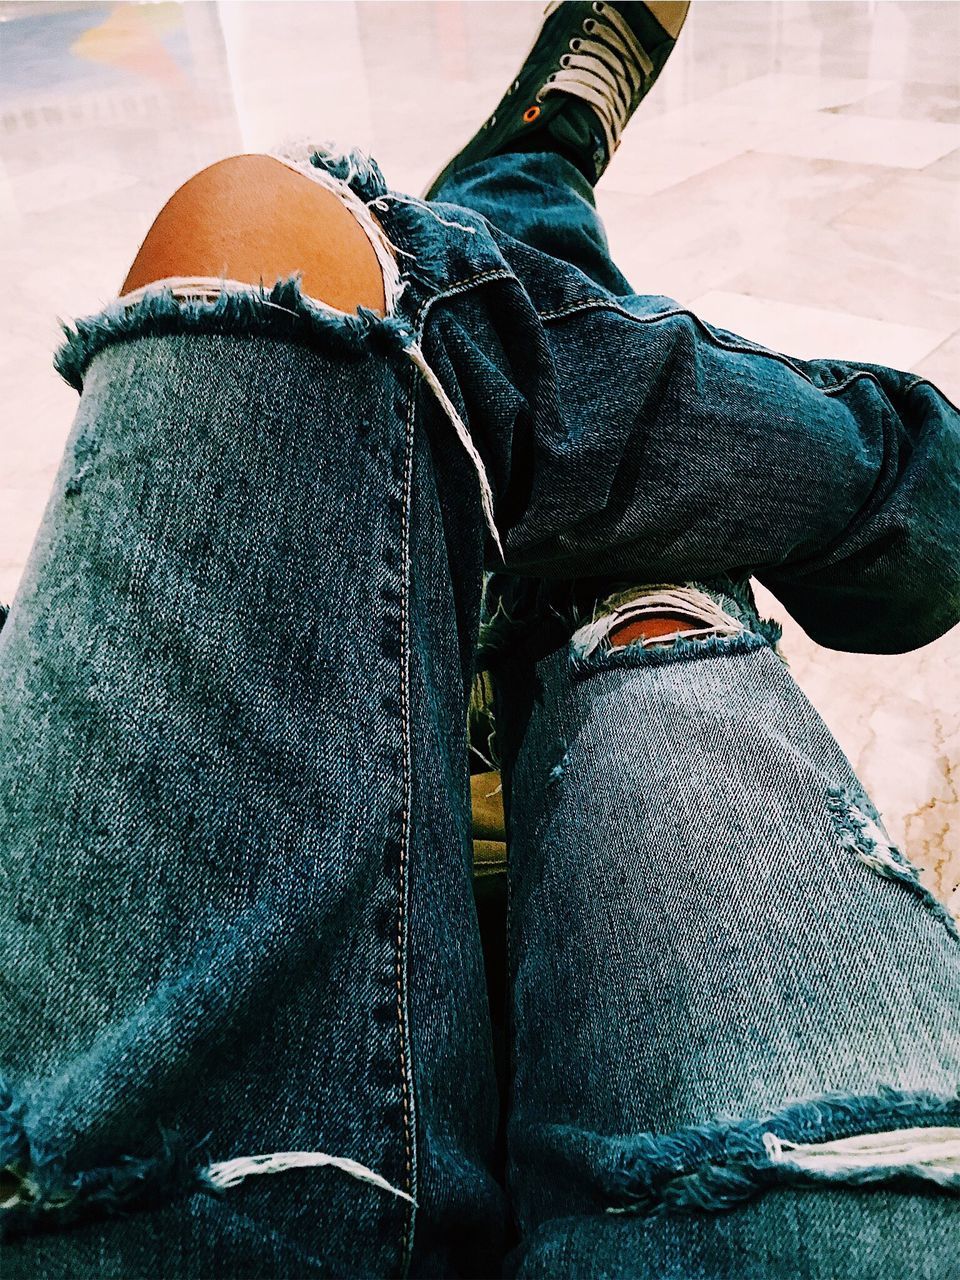 one person, jeans, human leg, casual clothing, real people, low section, human body part, lifestyles, body part, shoe, leisure activity, denim, personal perspective, textile, day, men, sitting, torn, relaxation, human foot, human limb, leather